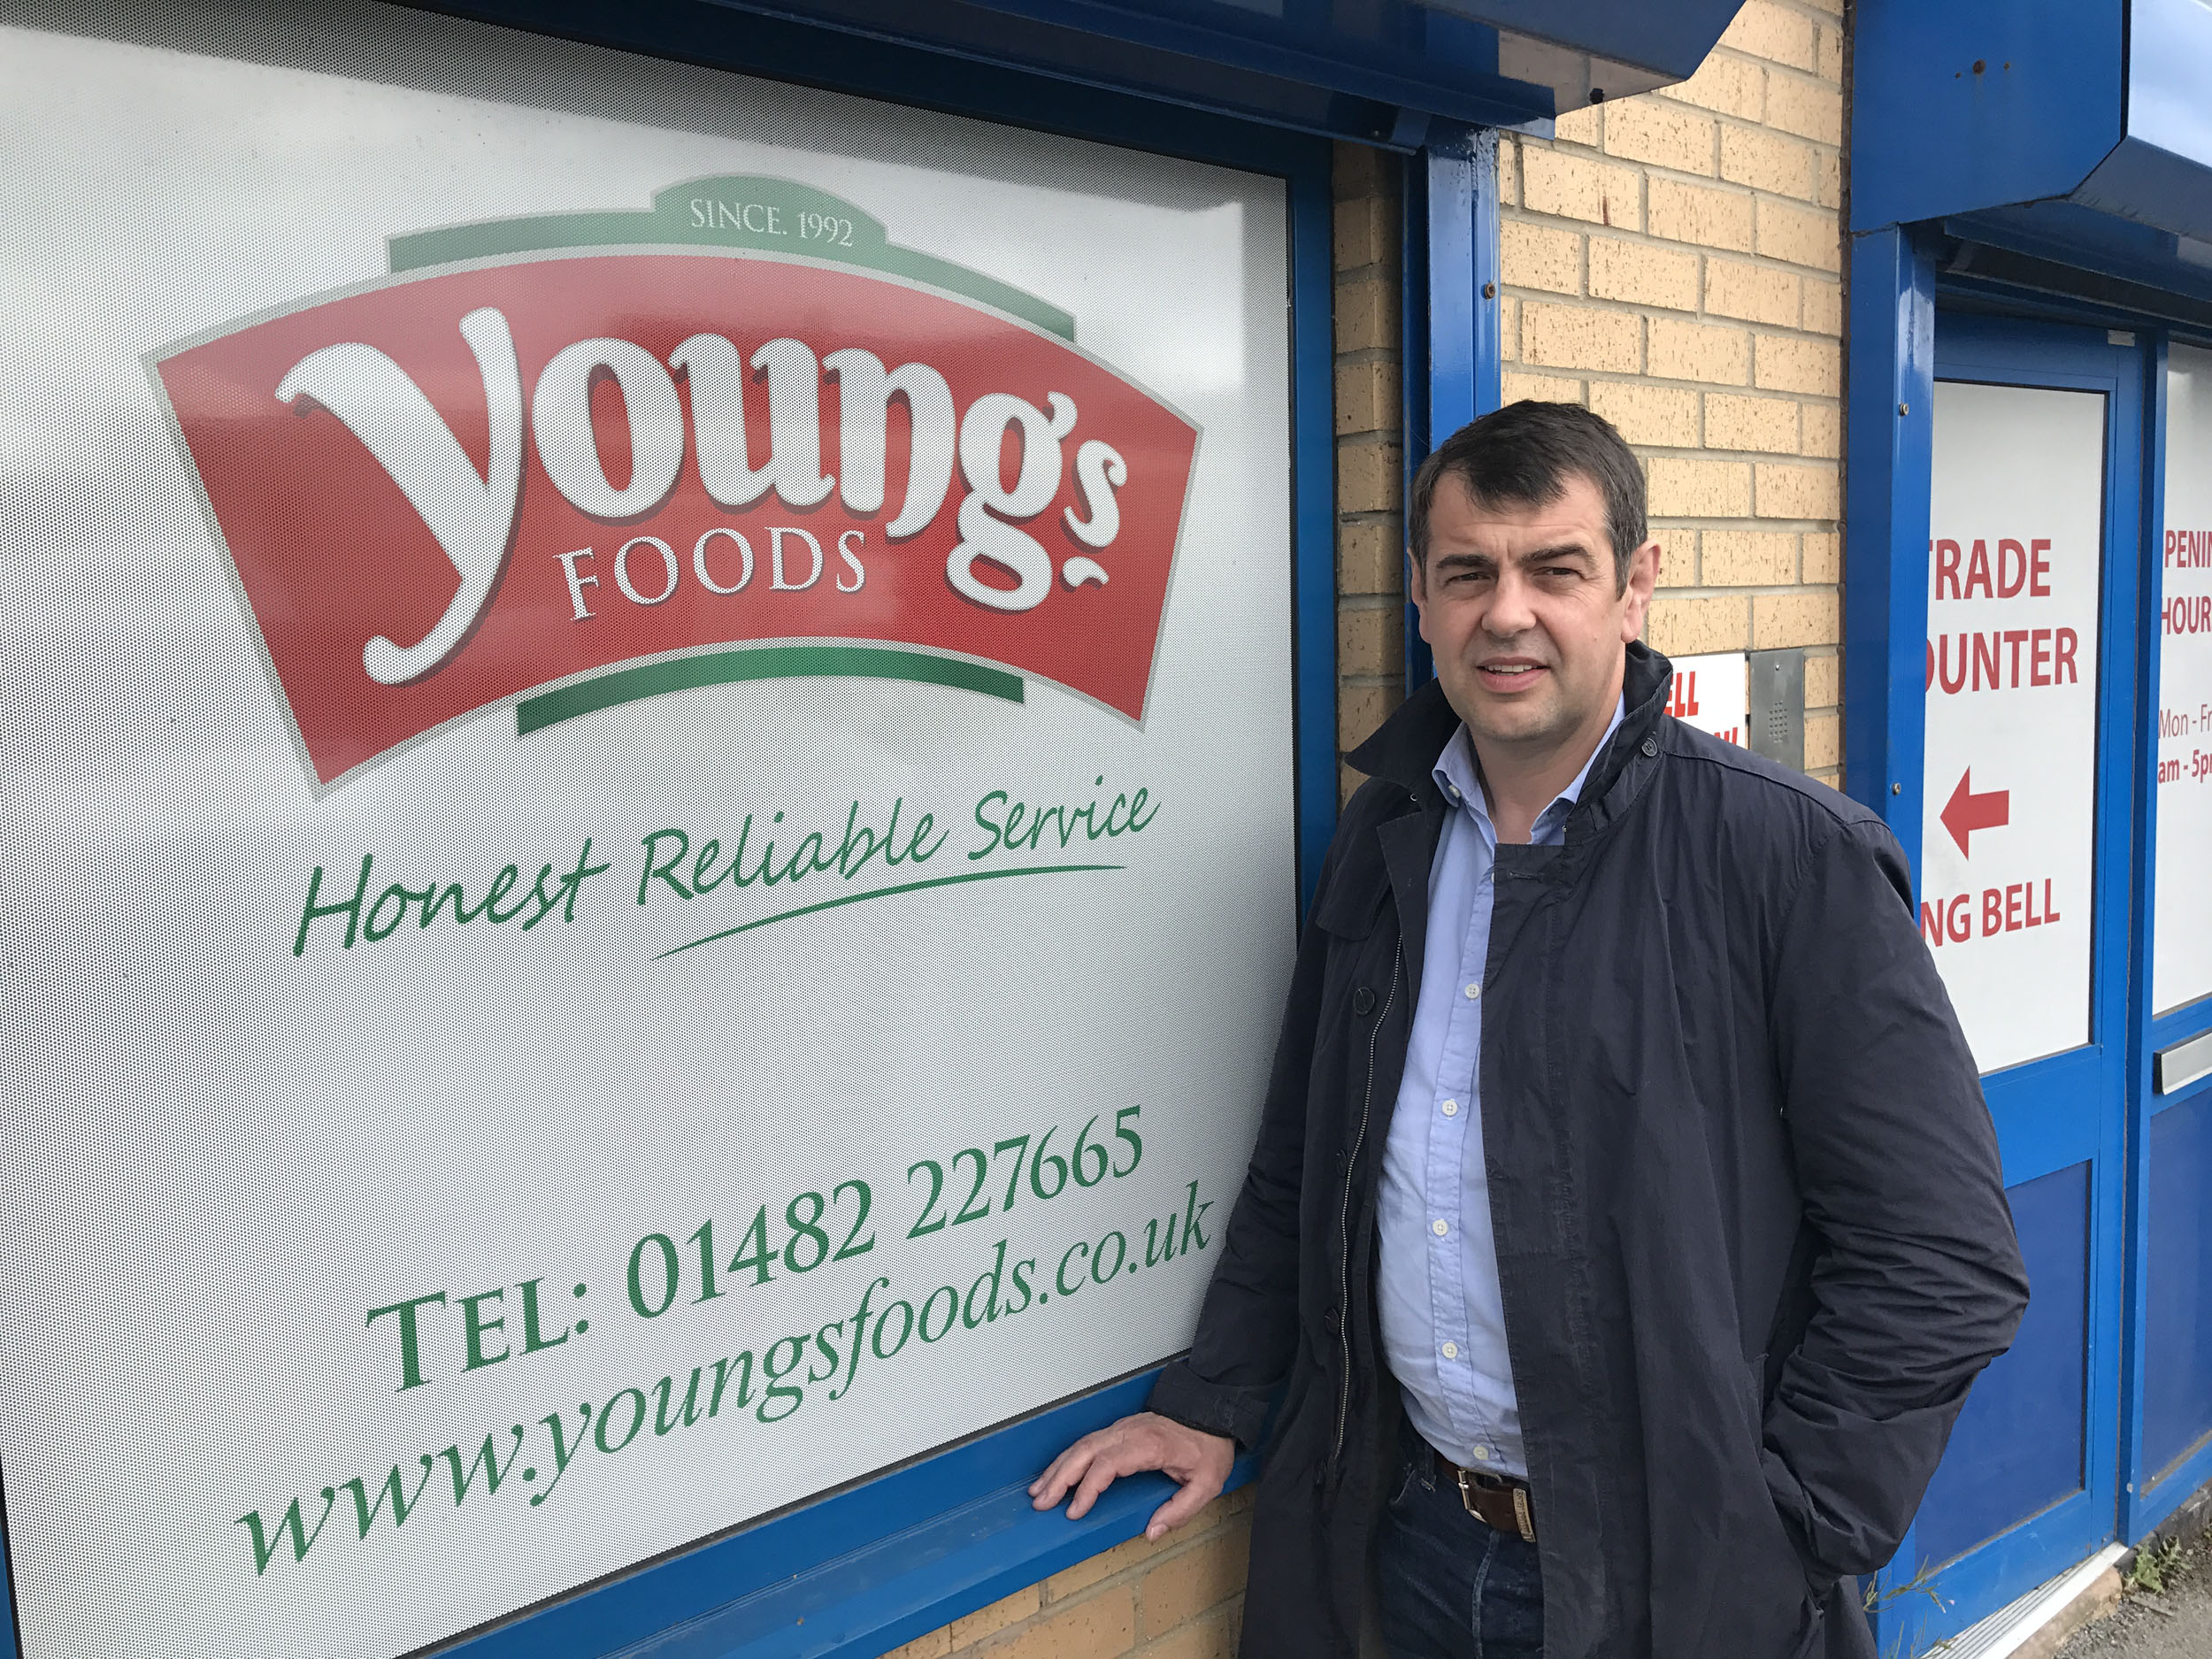 Youngs Foods joins Fairway Foodservice as its 20th member